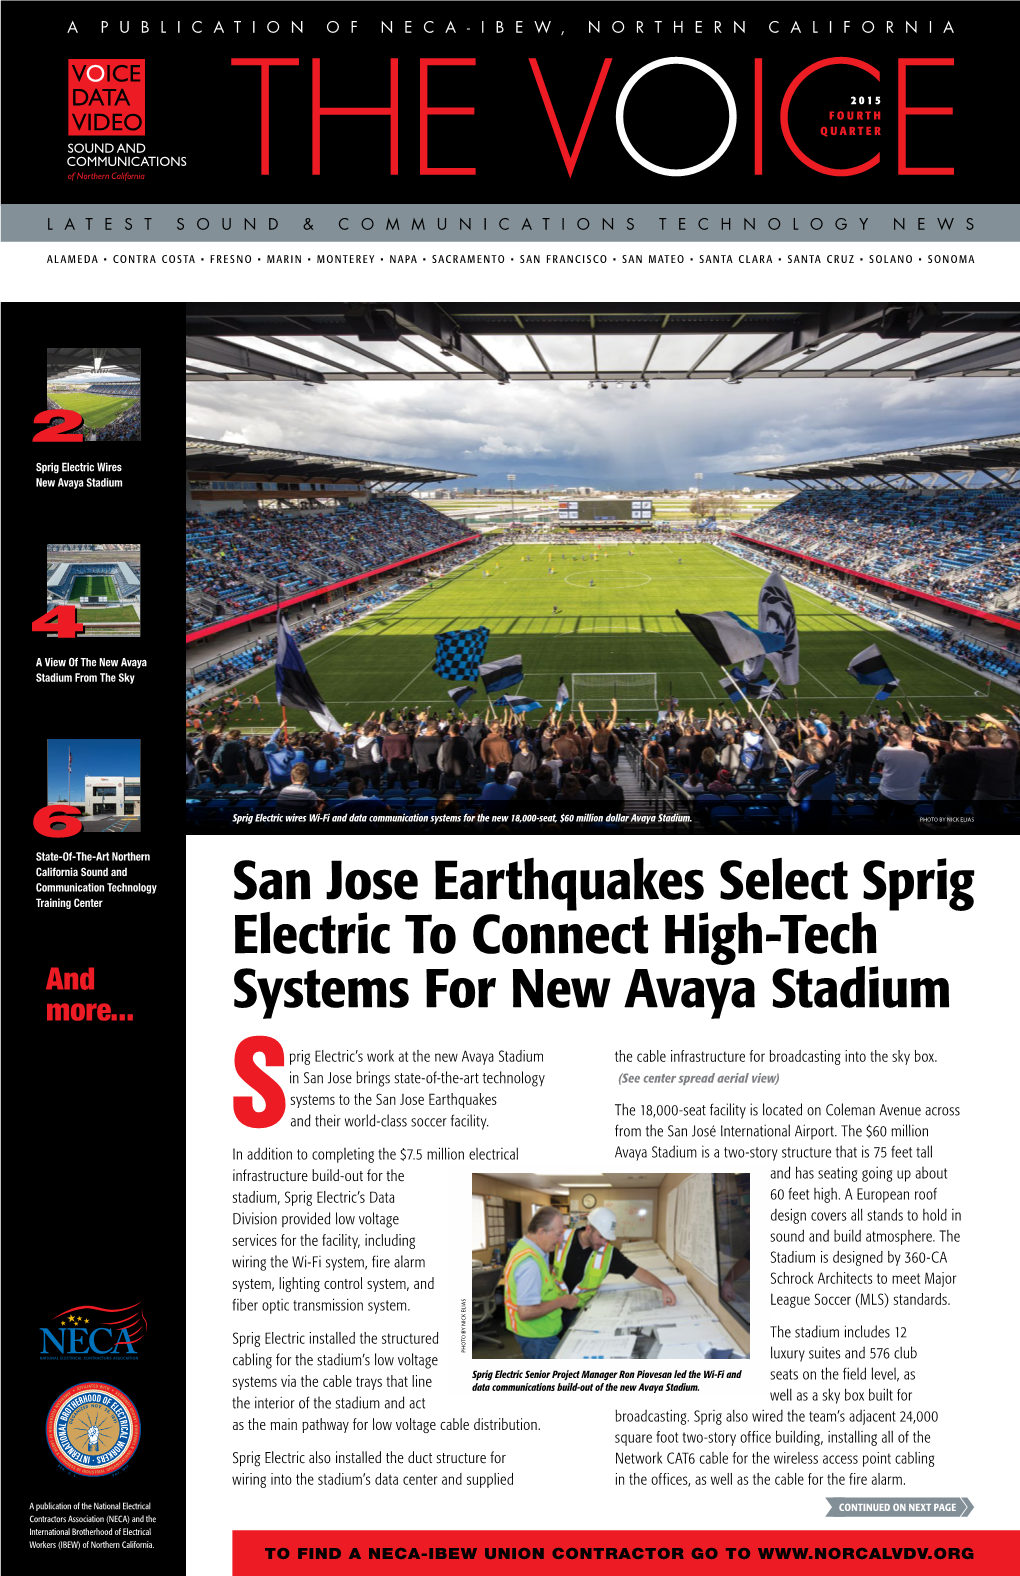 San Jose Earthquakes Select Sprig Electric to Connect High-Tech and More